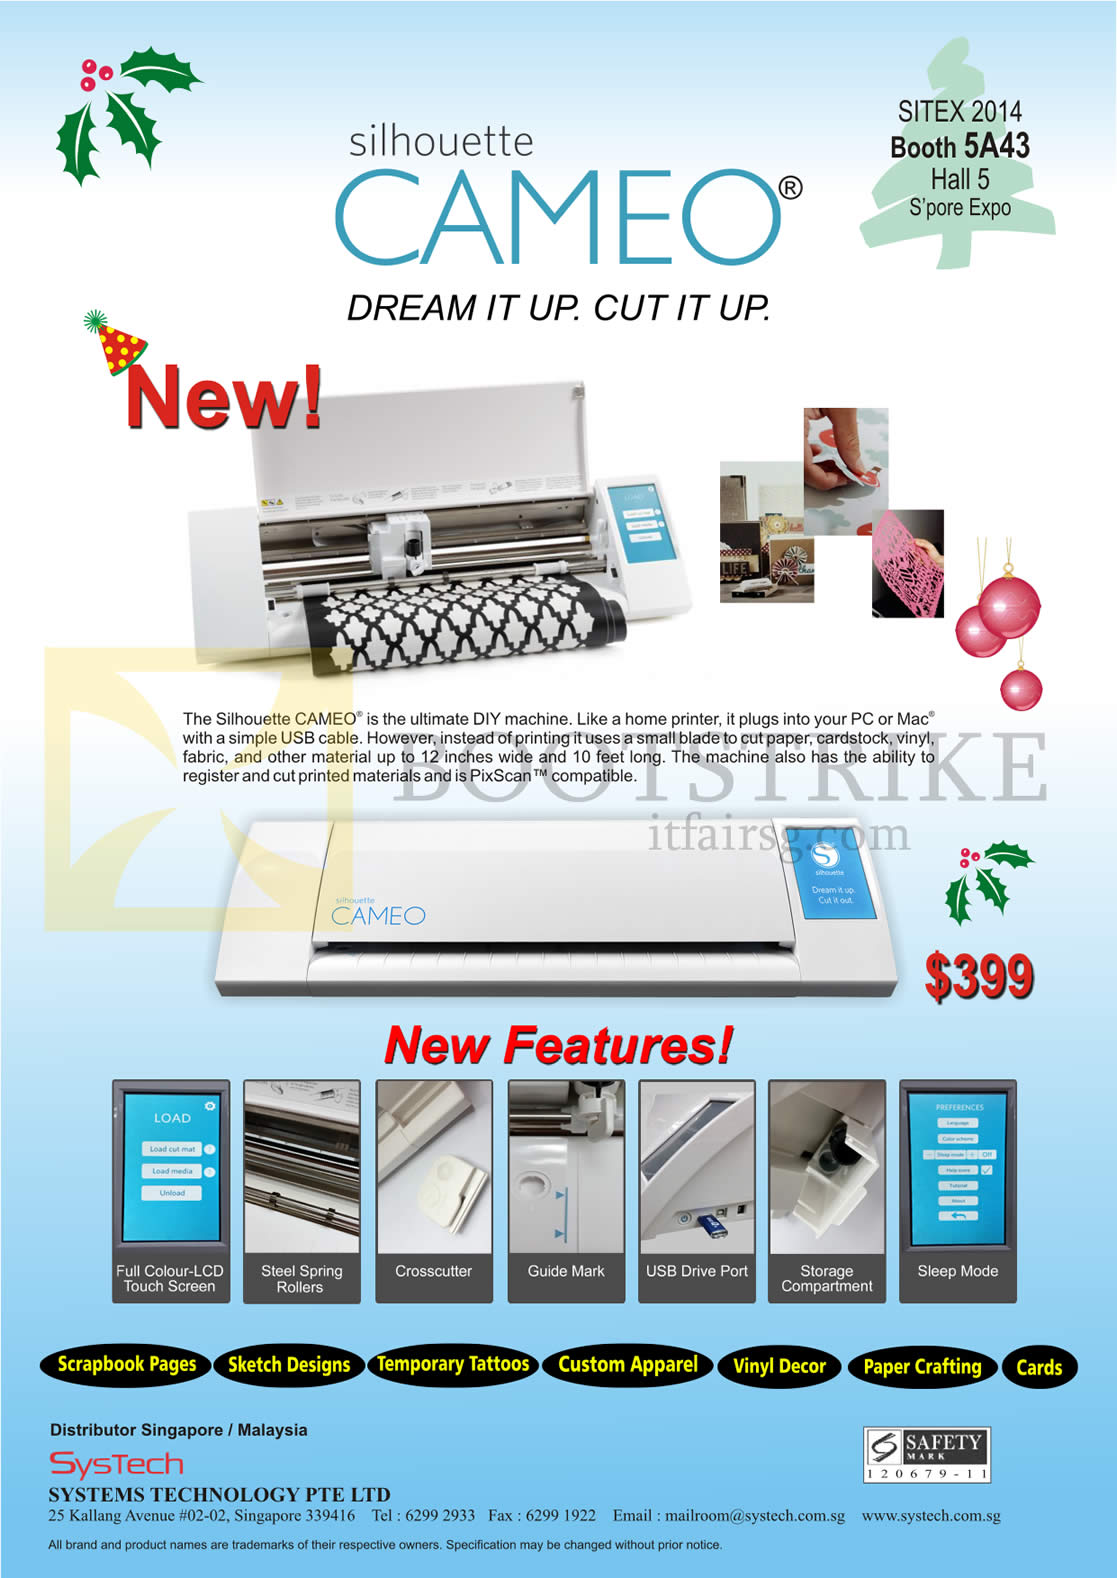 SITEX 2014 price list image brochure of Ranger Silhouette Cameo